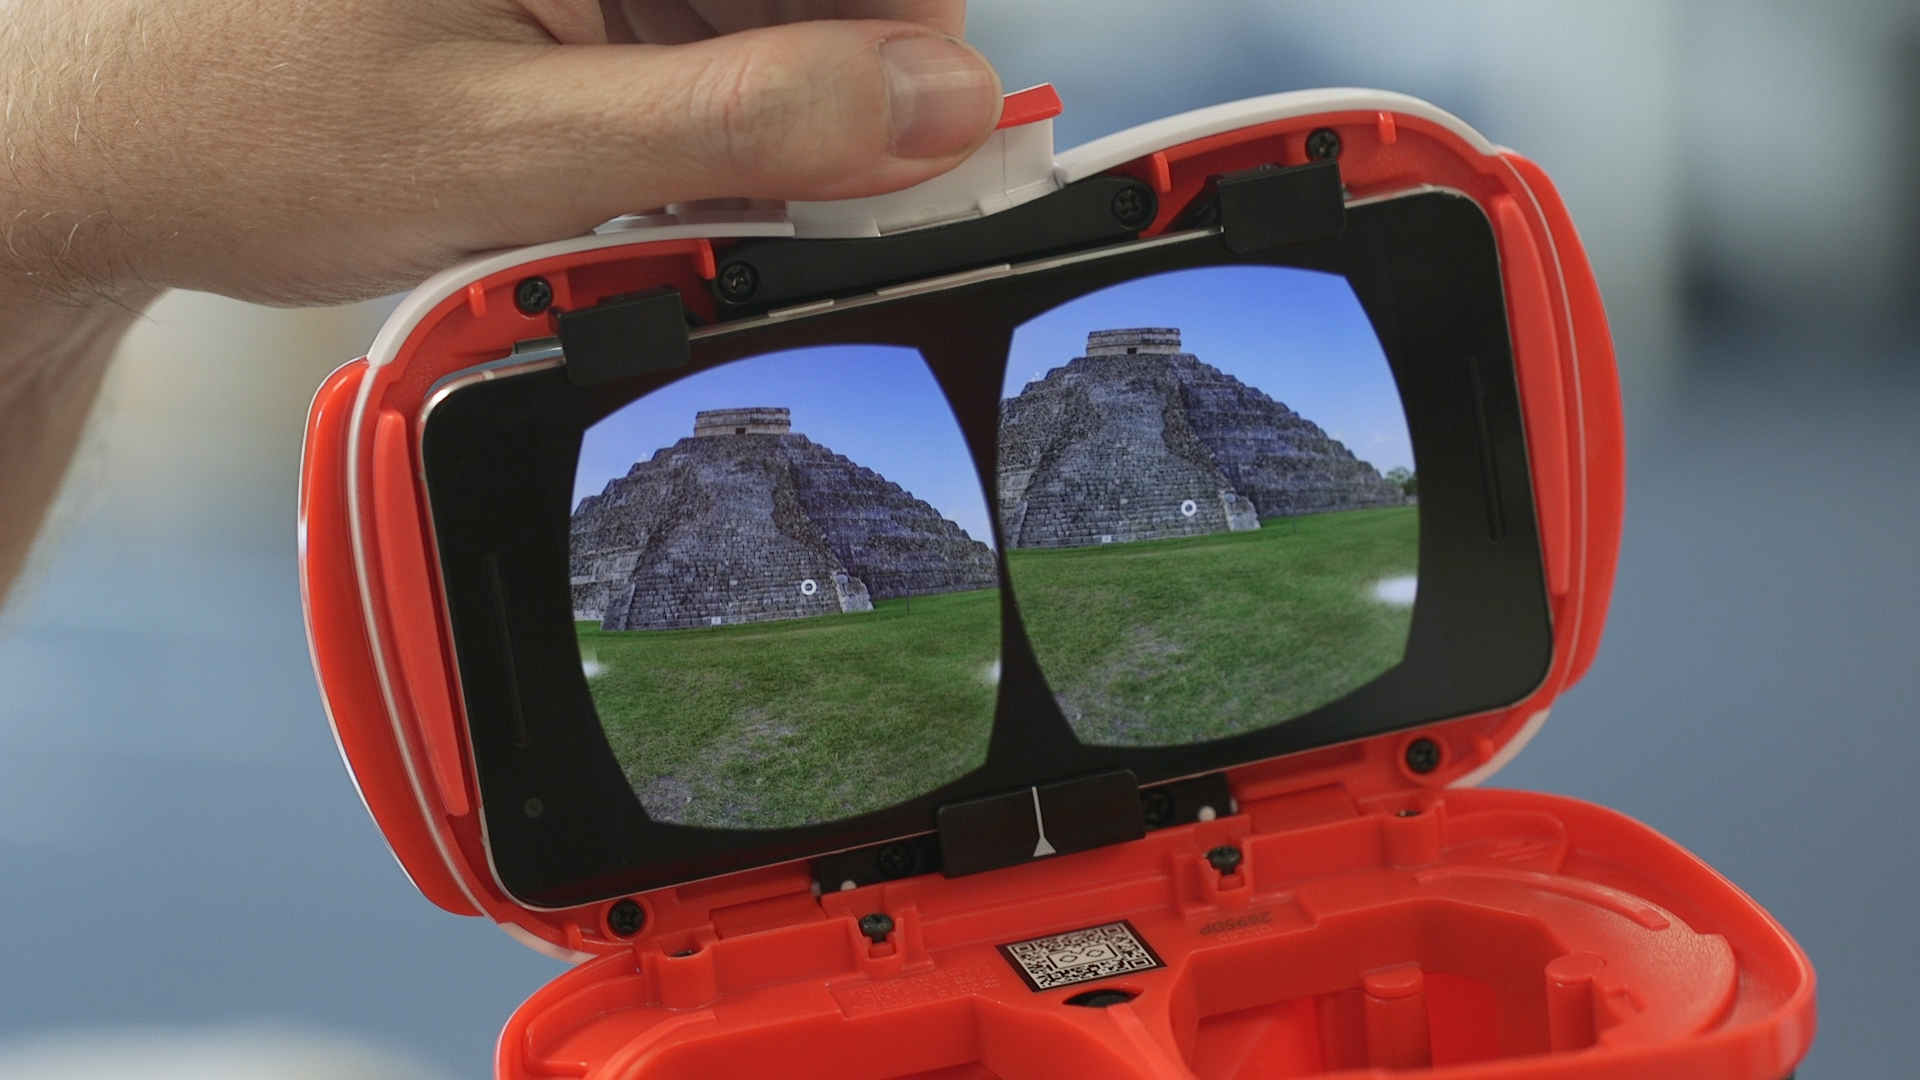 View-Master VR review: A great first taste of VR for kids